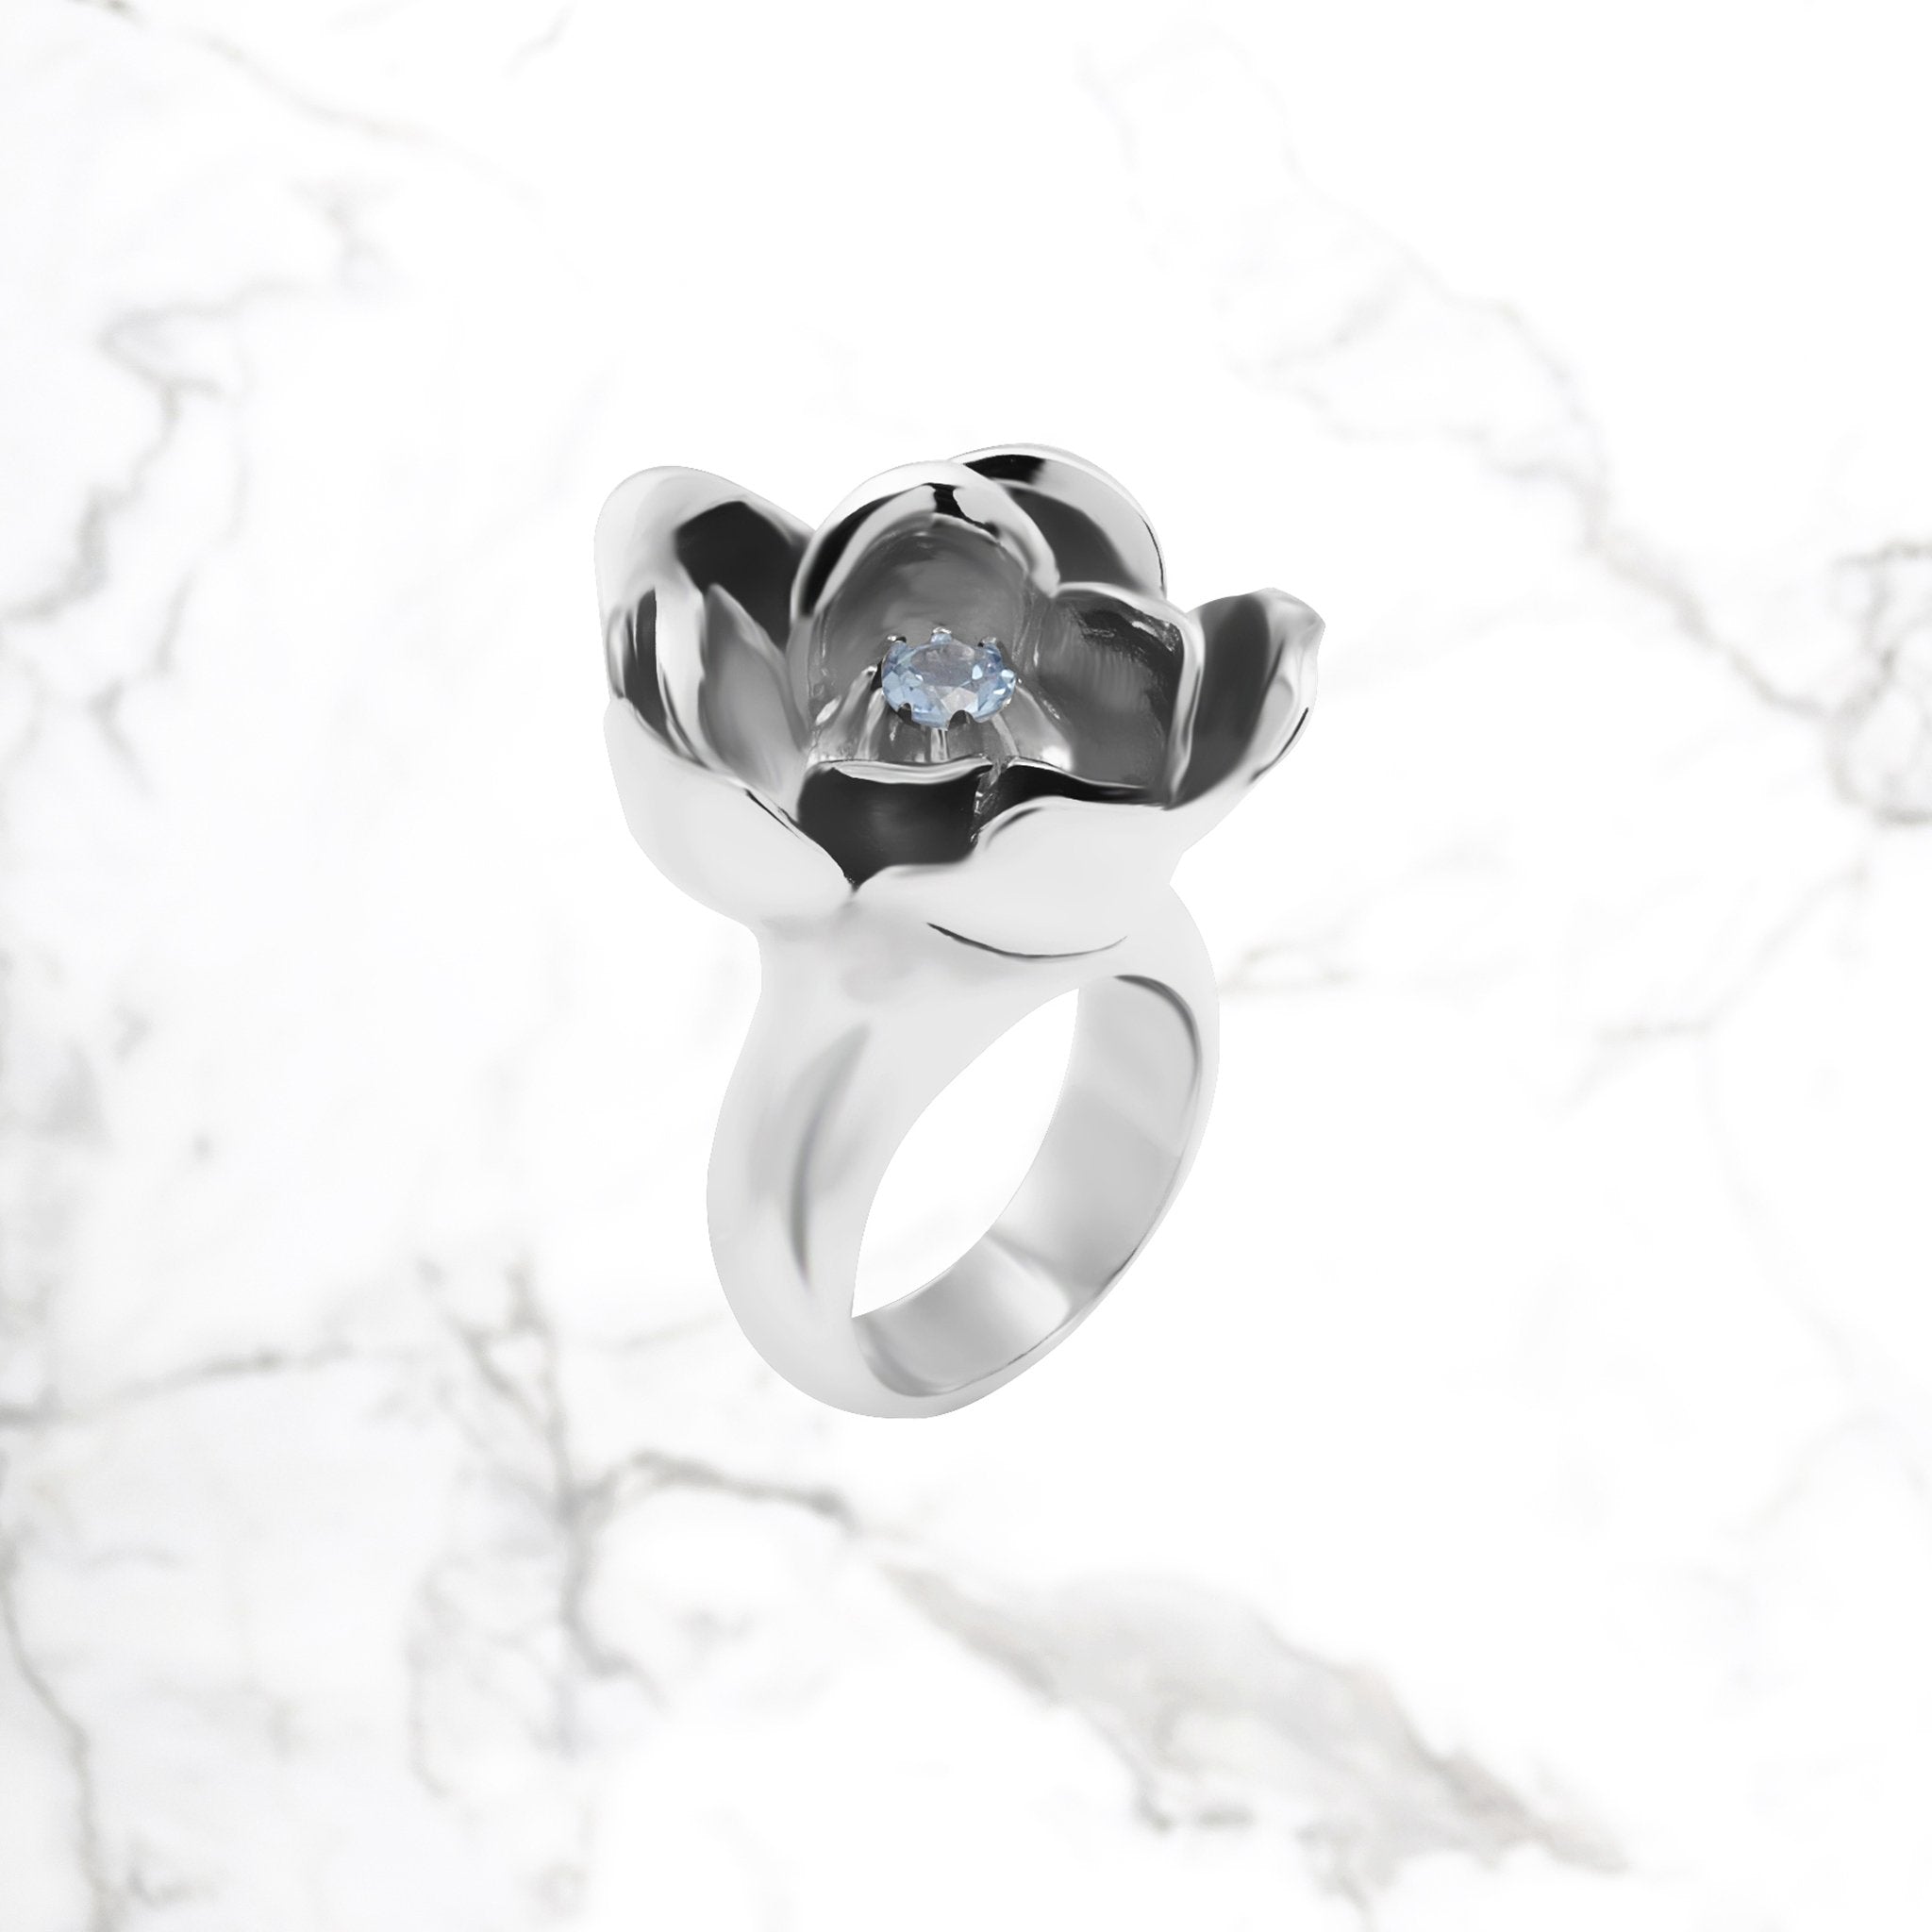 Handcrafted M2 flower ring with lab-grown blue topaz